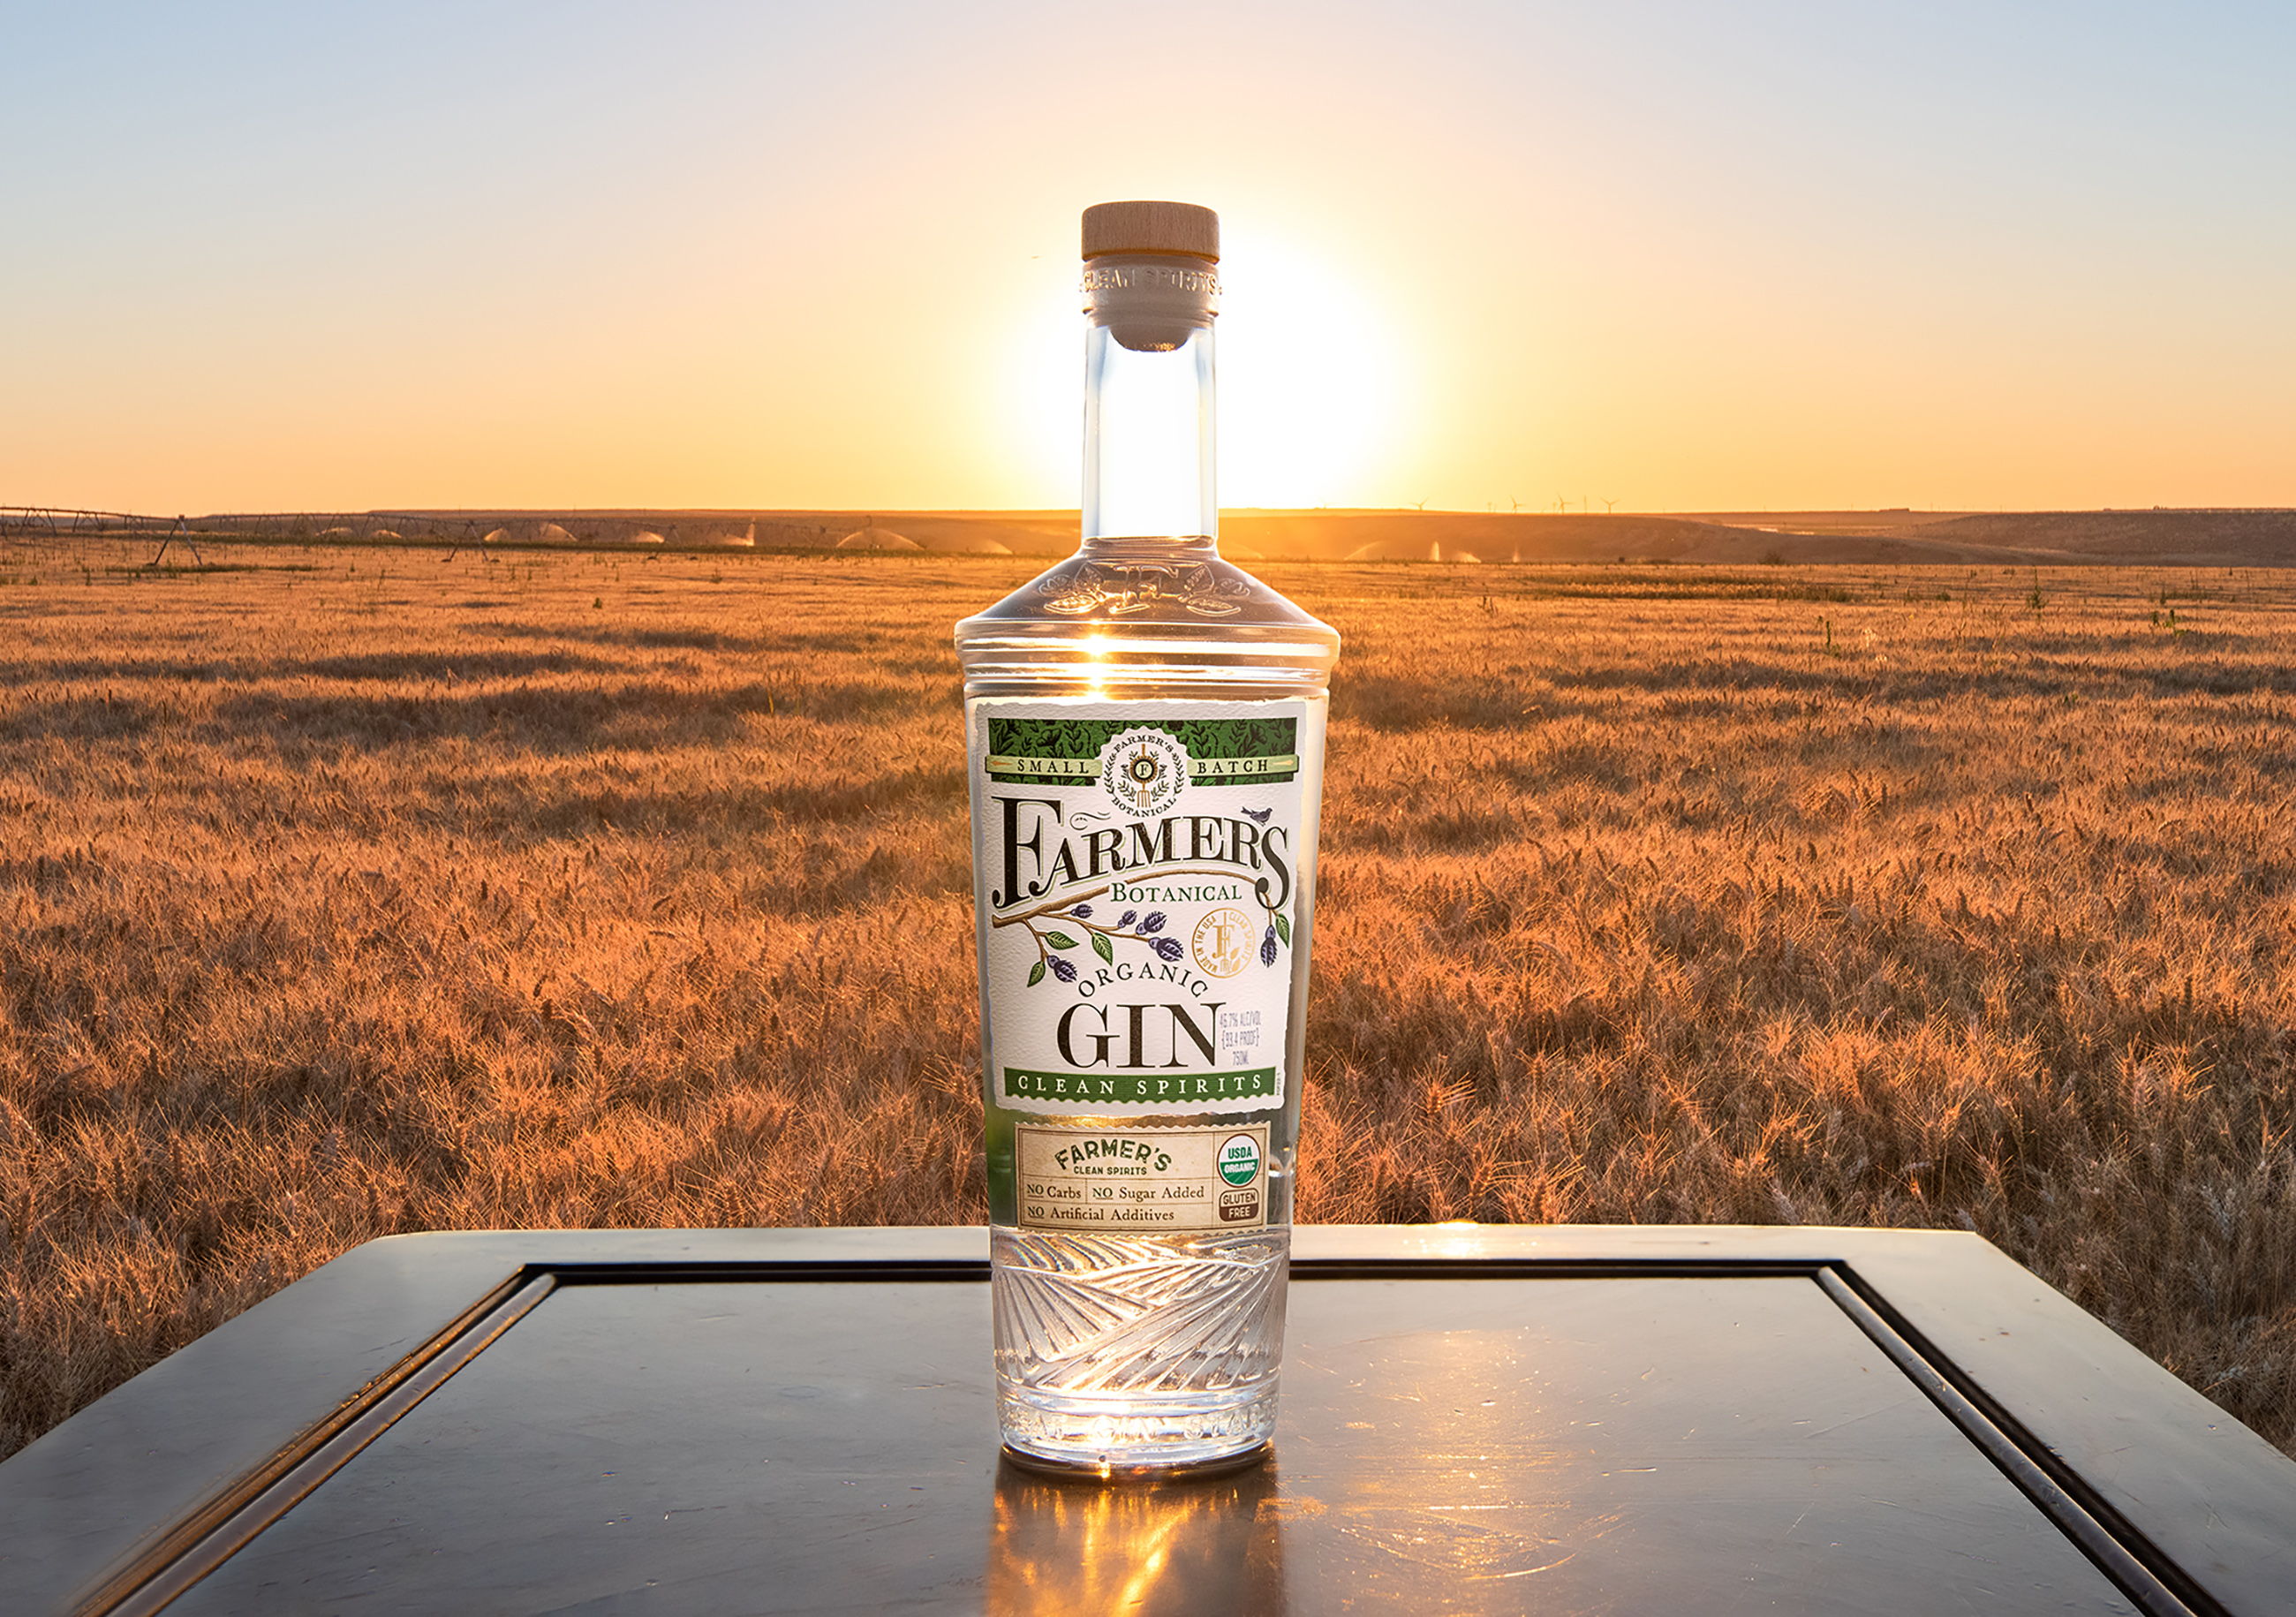 Farmer's Organic Gin is produced entirely in Idaho and features hemp seed and other beautiful botanicals.